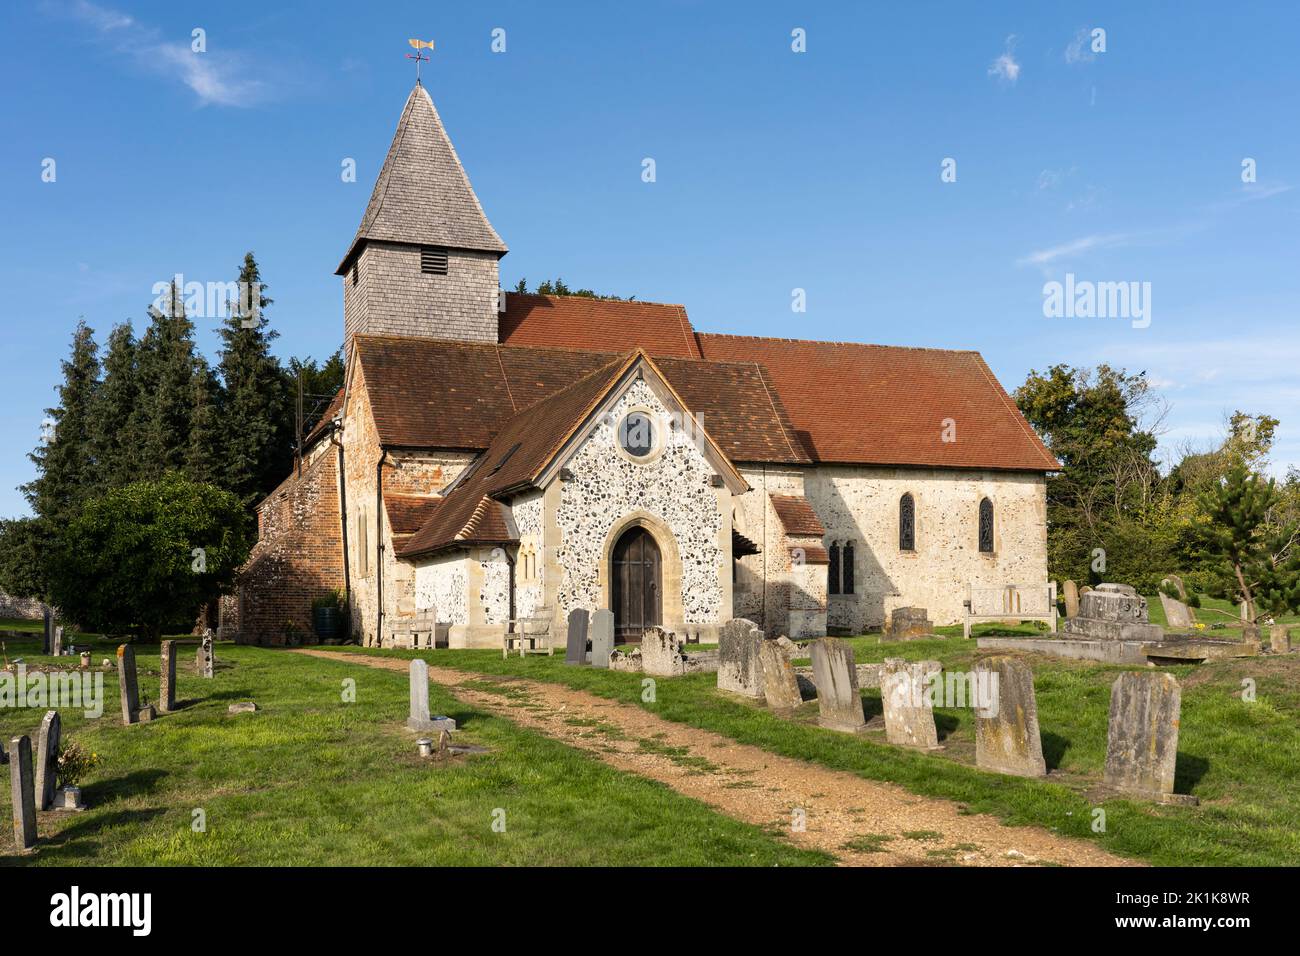 St Mary the Virgin, a 12th-century country church with a wooden belfrey standing inside the ancient walls of Silchester Roman city. Hampshire, UK Stock Photo